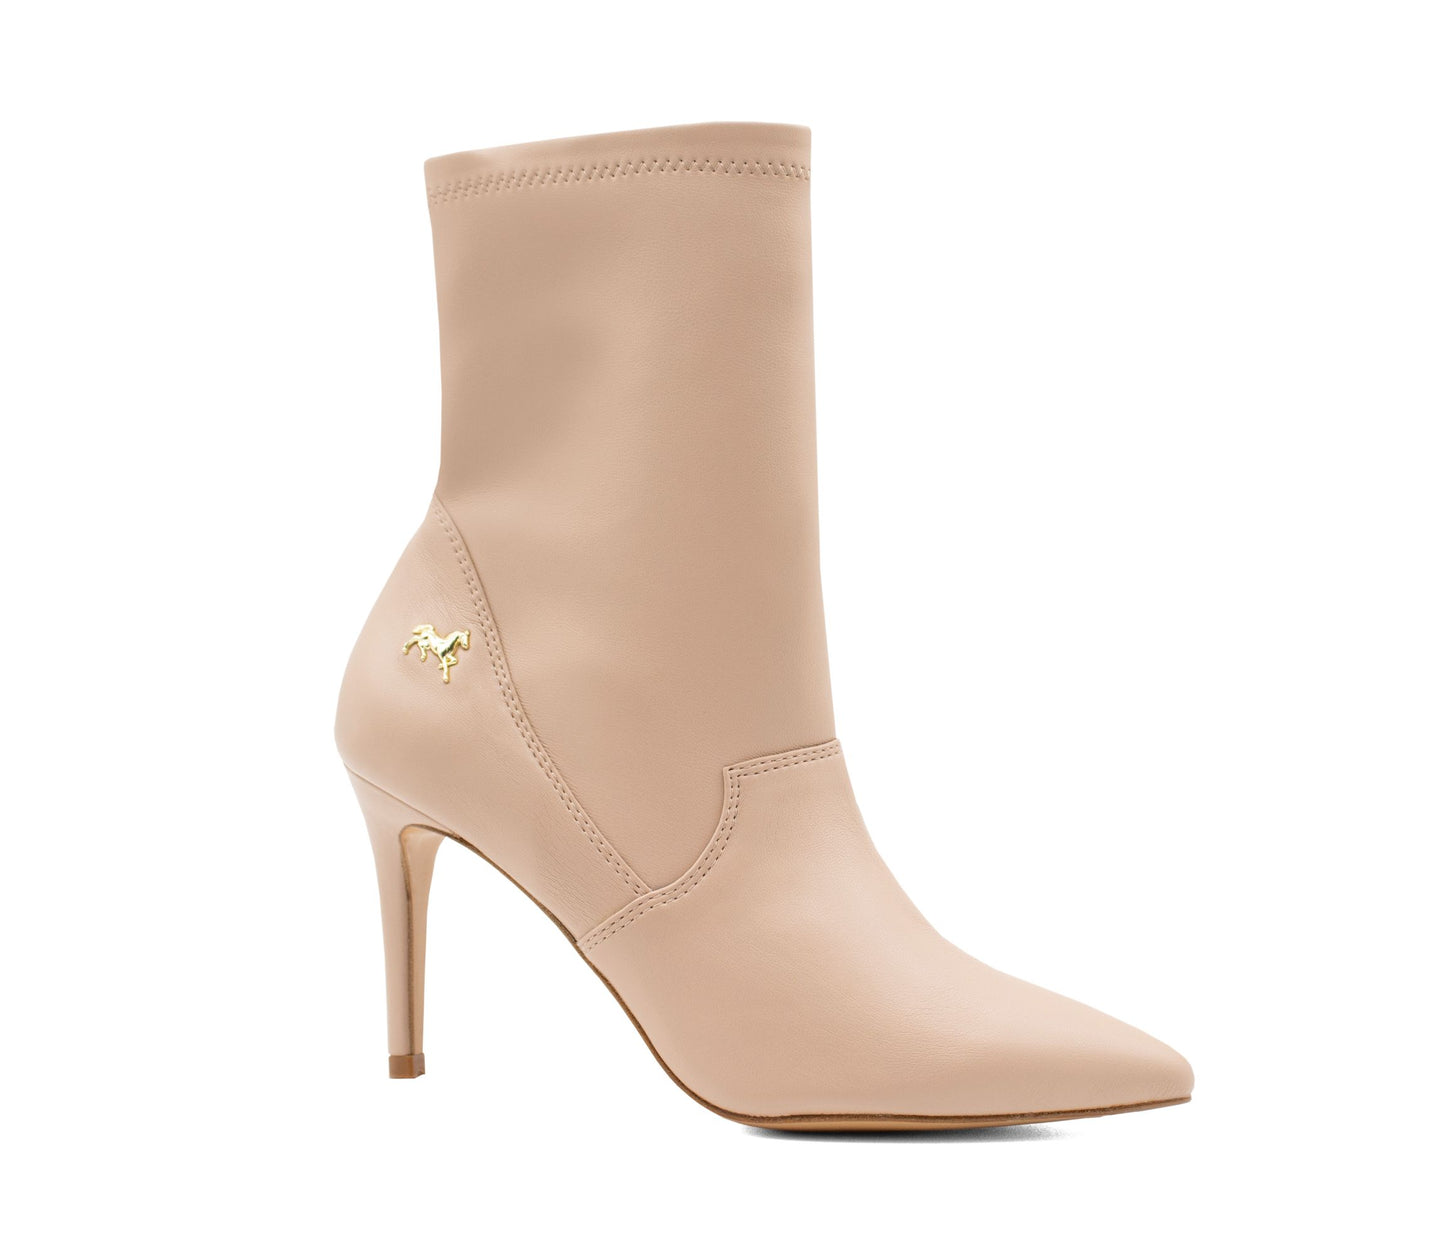 #color_ Beige | Cavalinho Amore Leather Boots - Beige - 48100603.05_2